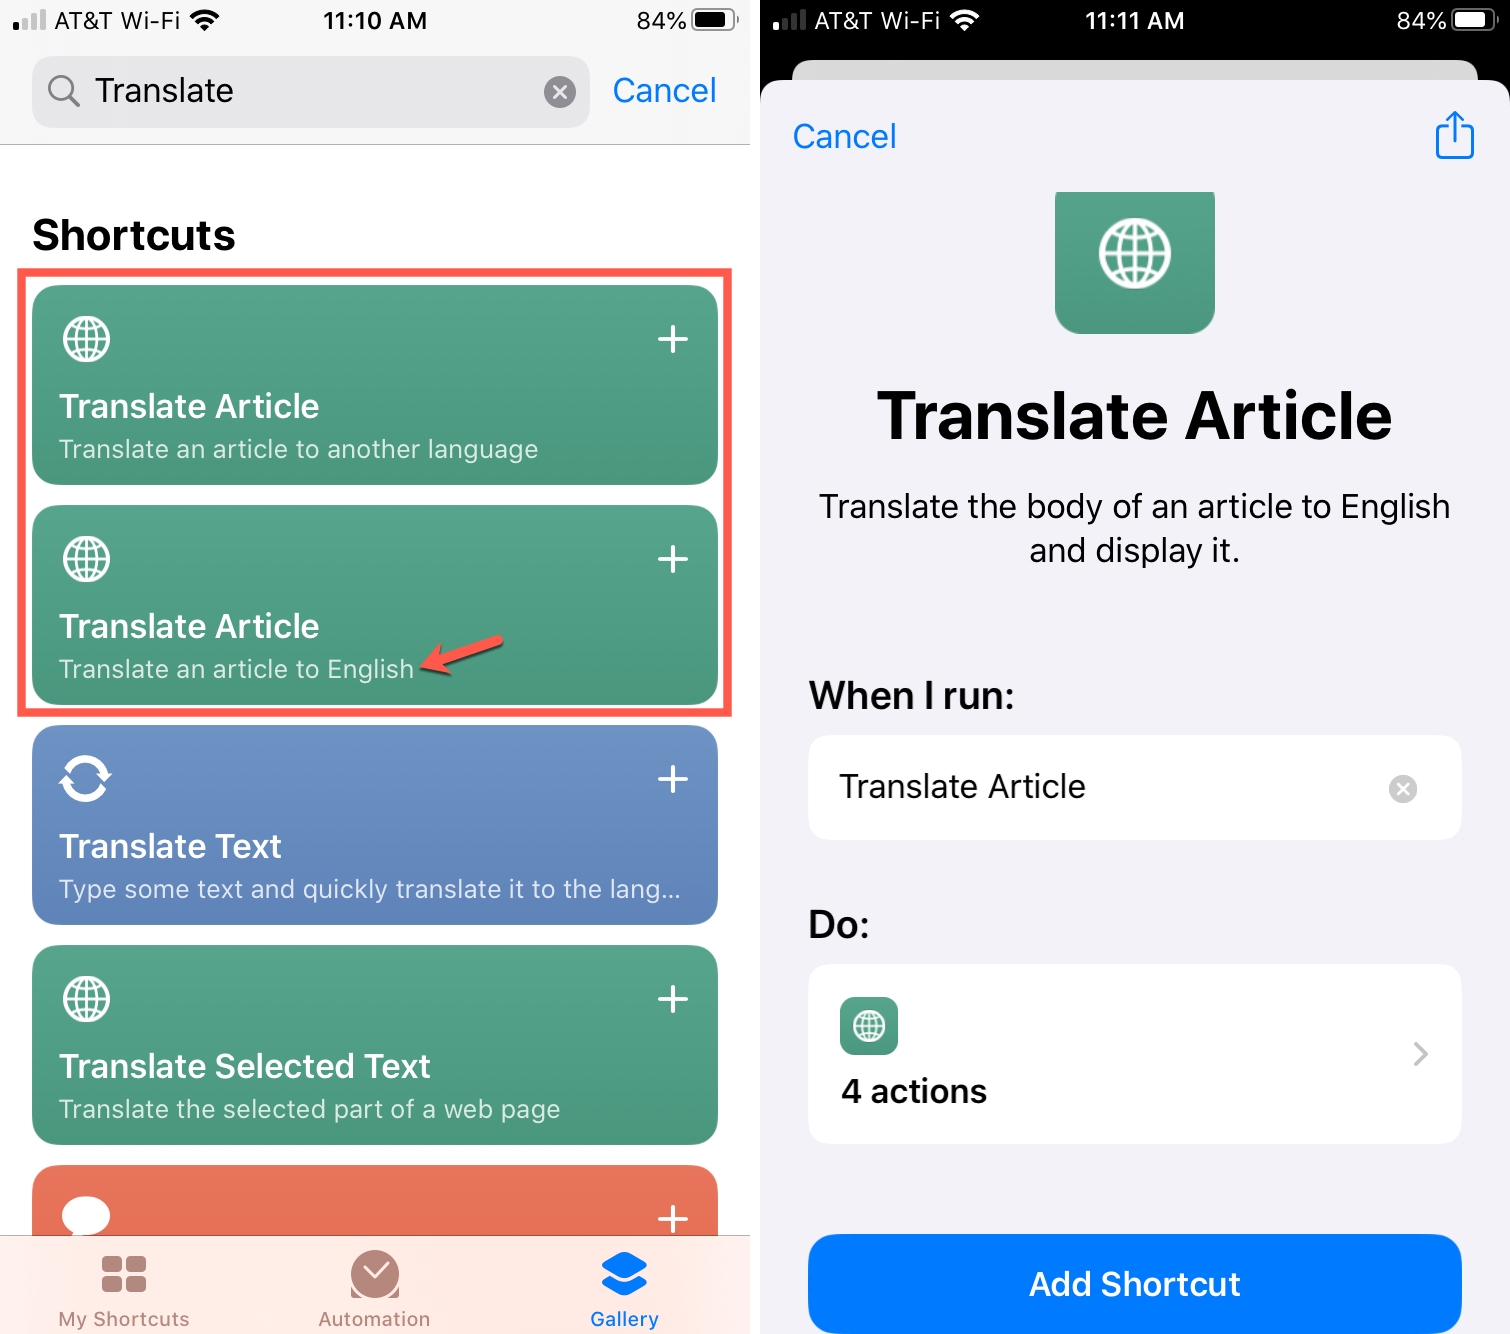 Shortcuts Gallery Translate Article